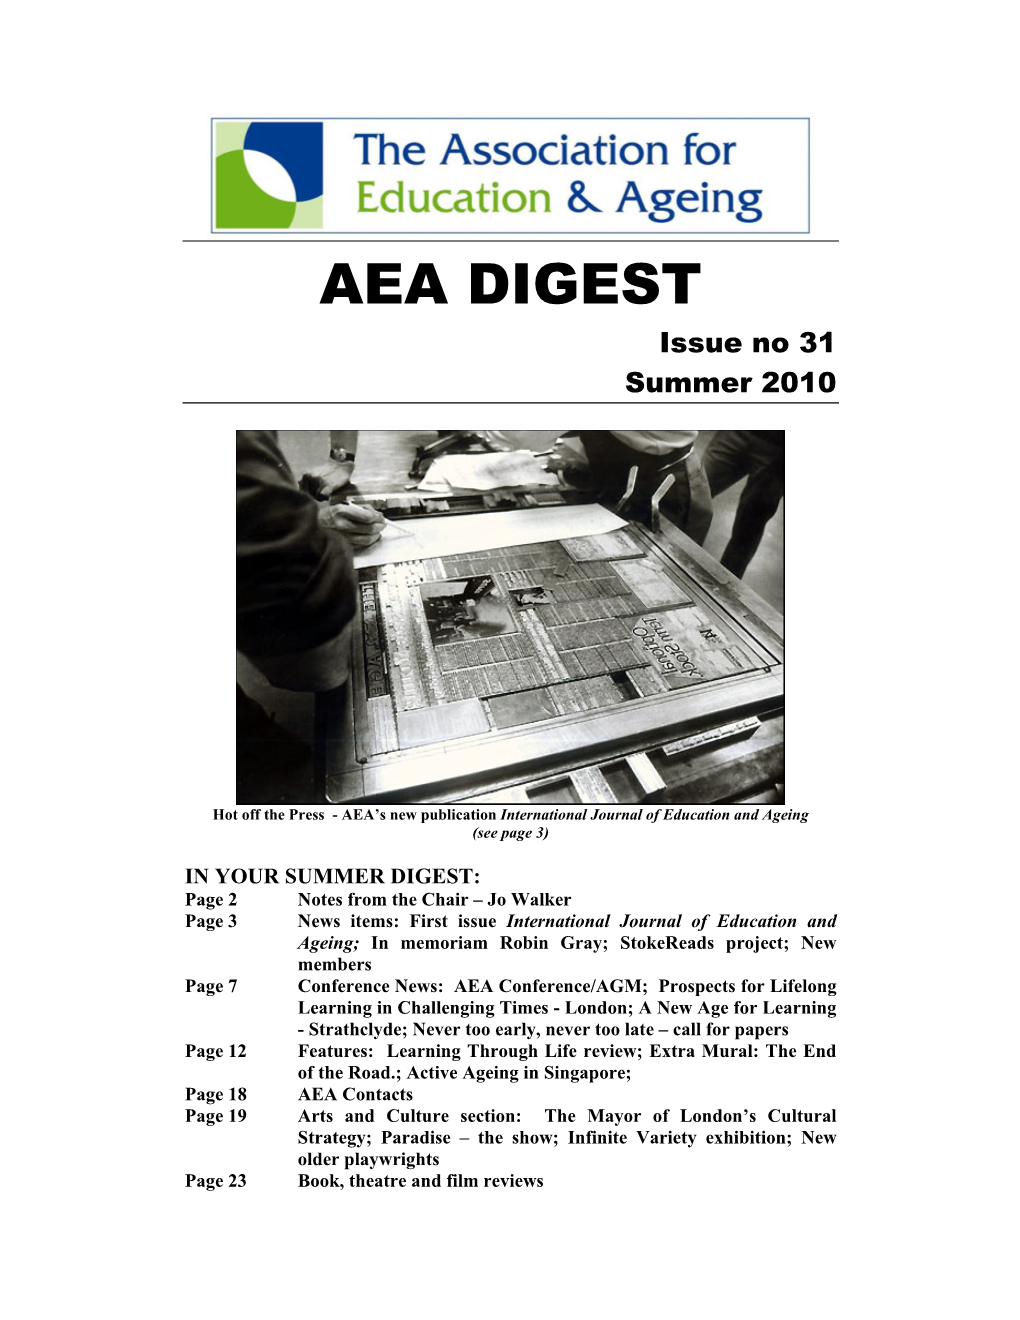 AEA DIGEST Issue No 31 Summer 2010